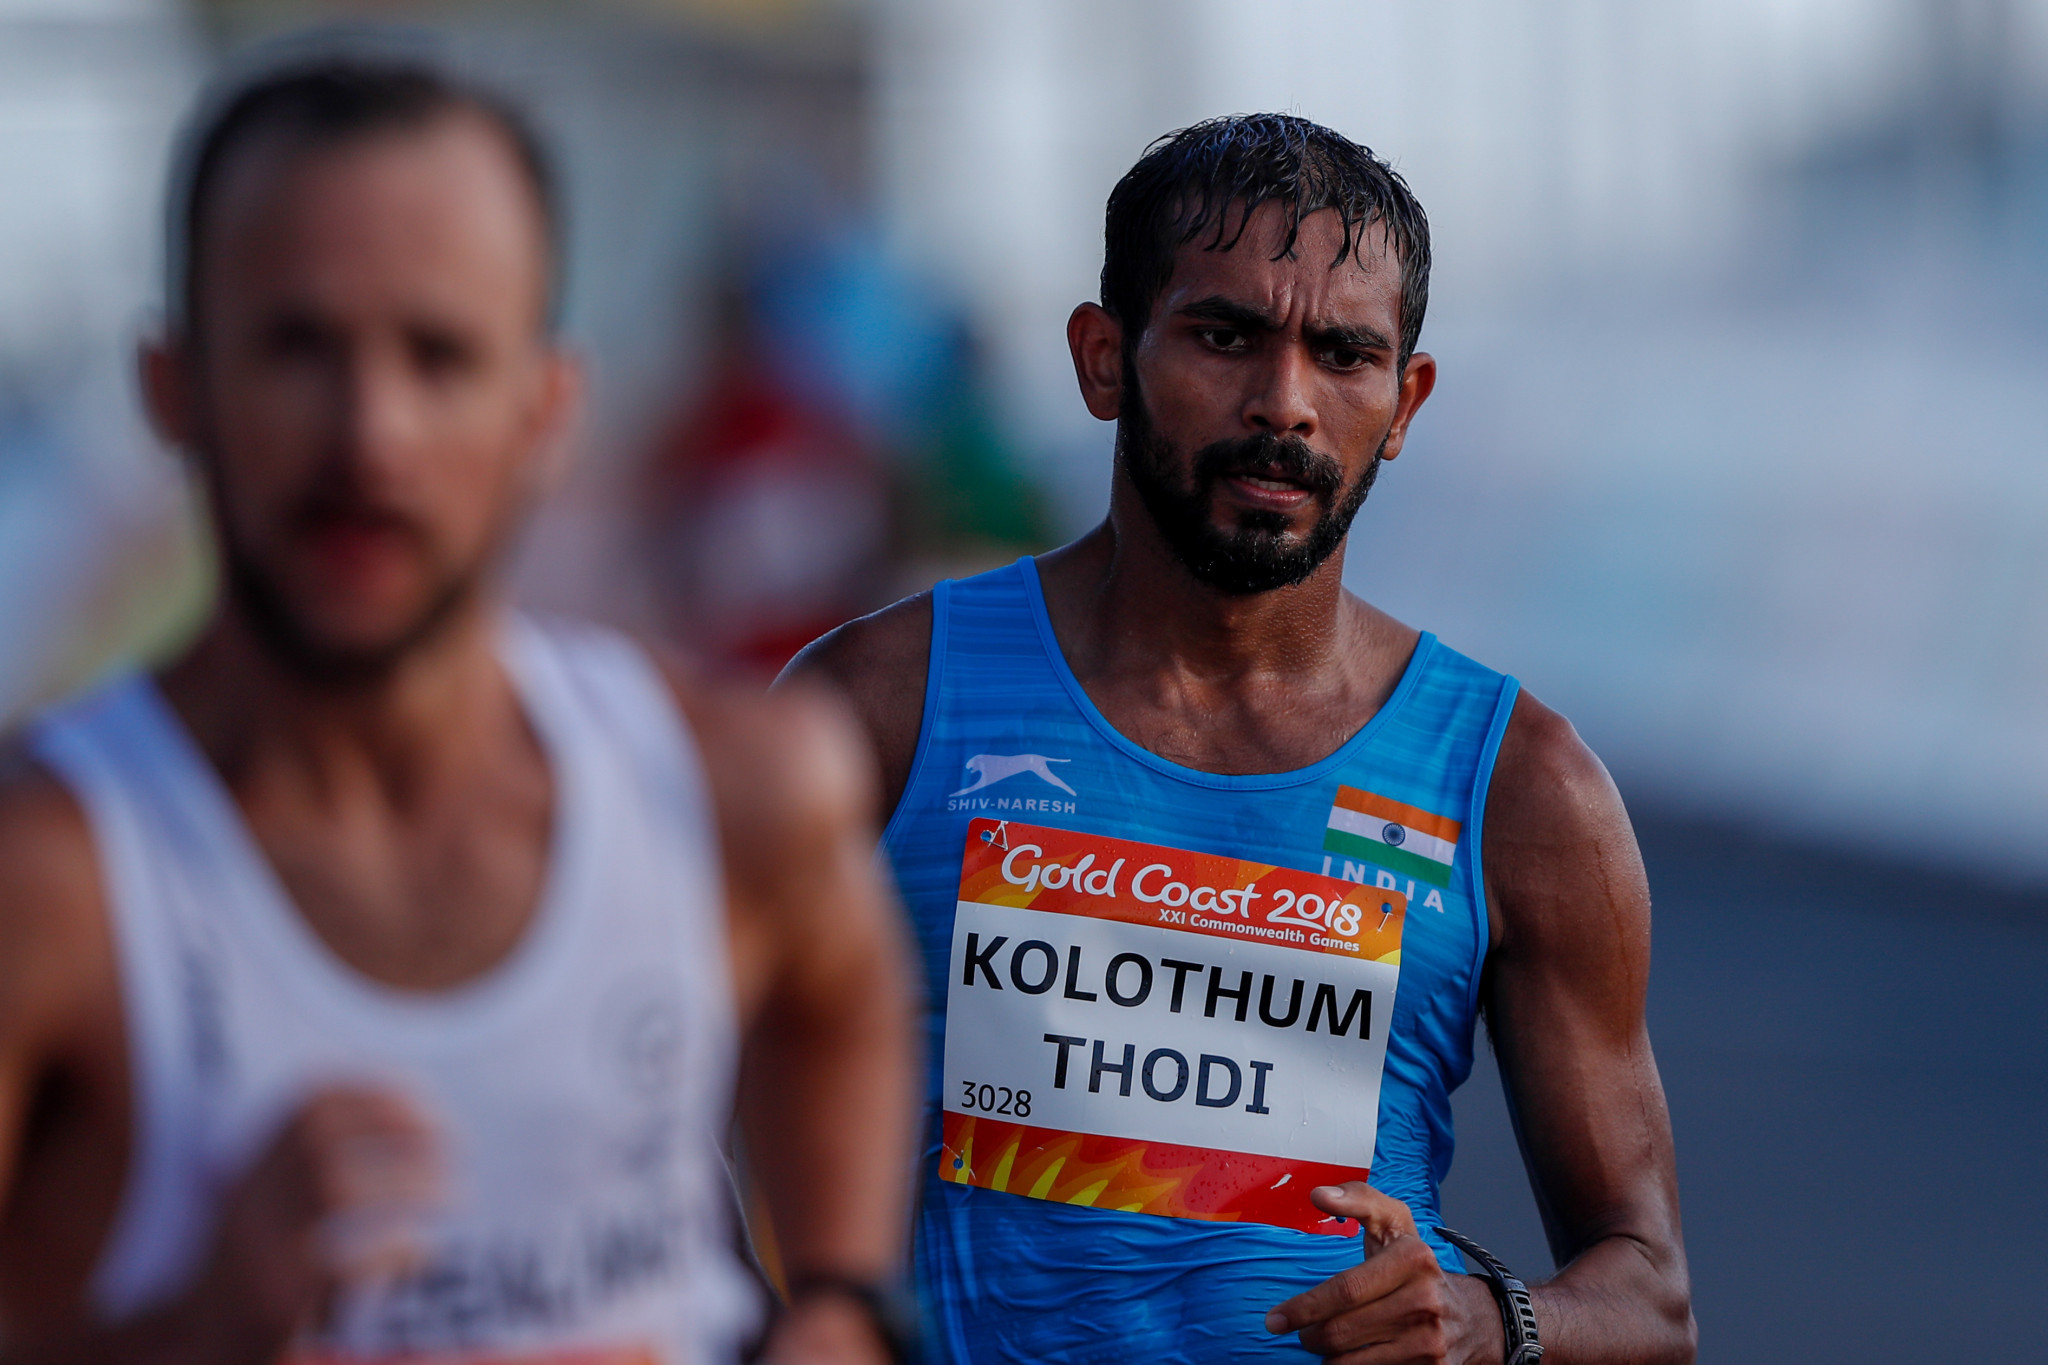 Race walker Irfan Kolothum Thodi finished 13th in the 20km event at Gold Coast 2018 ©Getty Images